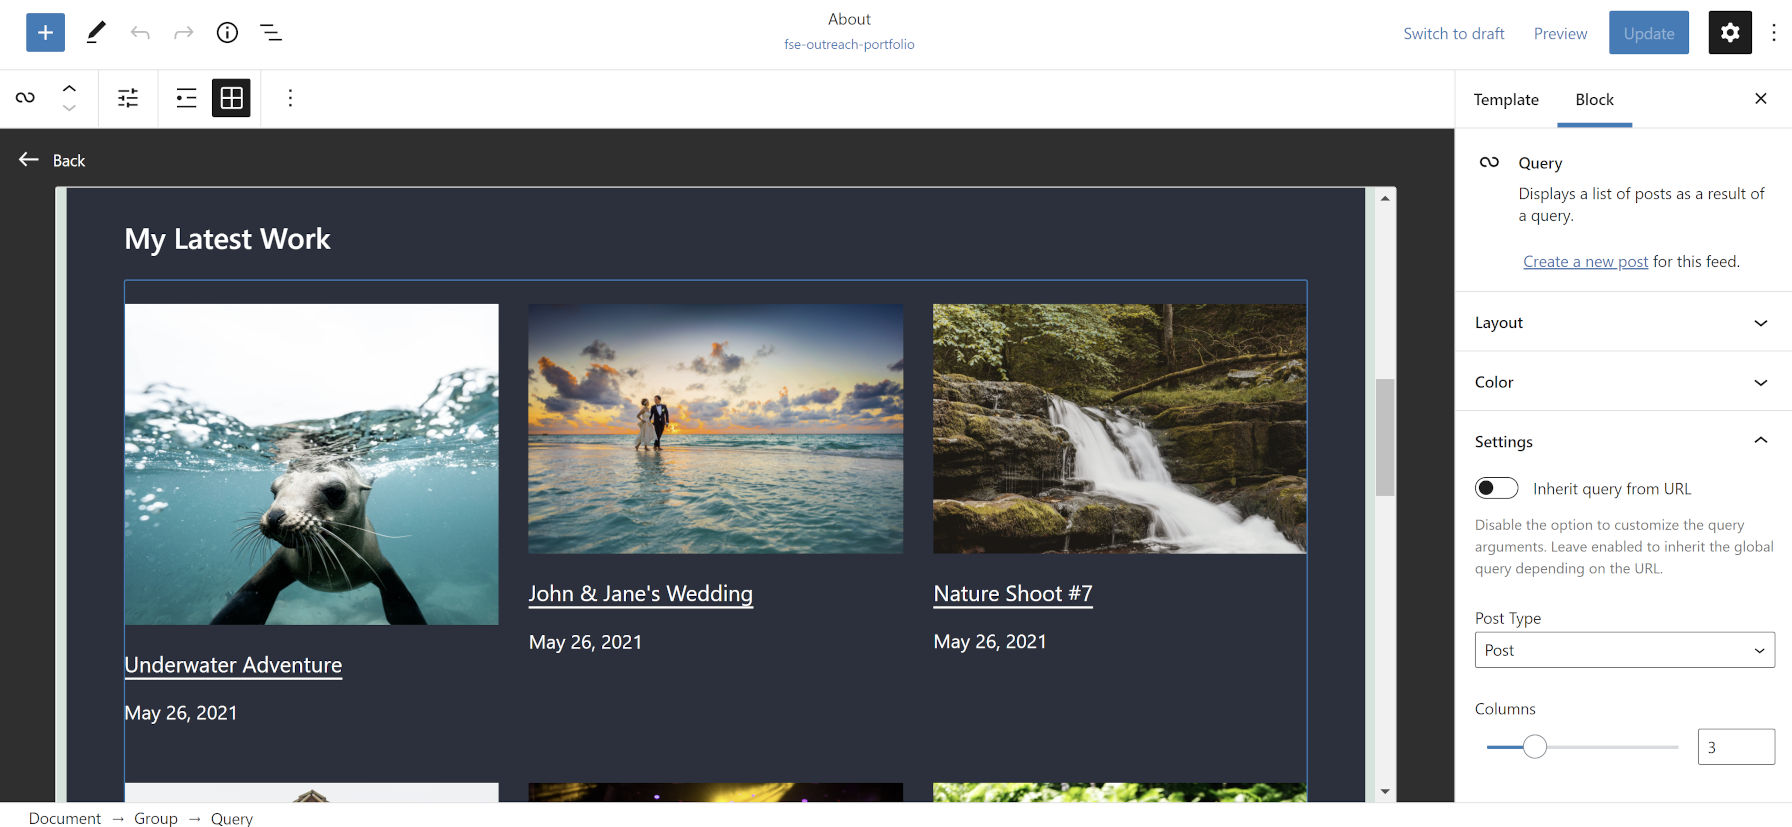 A three-column grid of portfolio project images, titles, and dates.